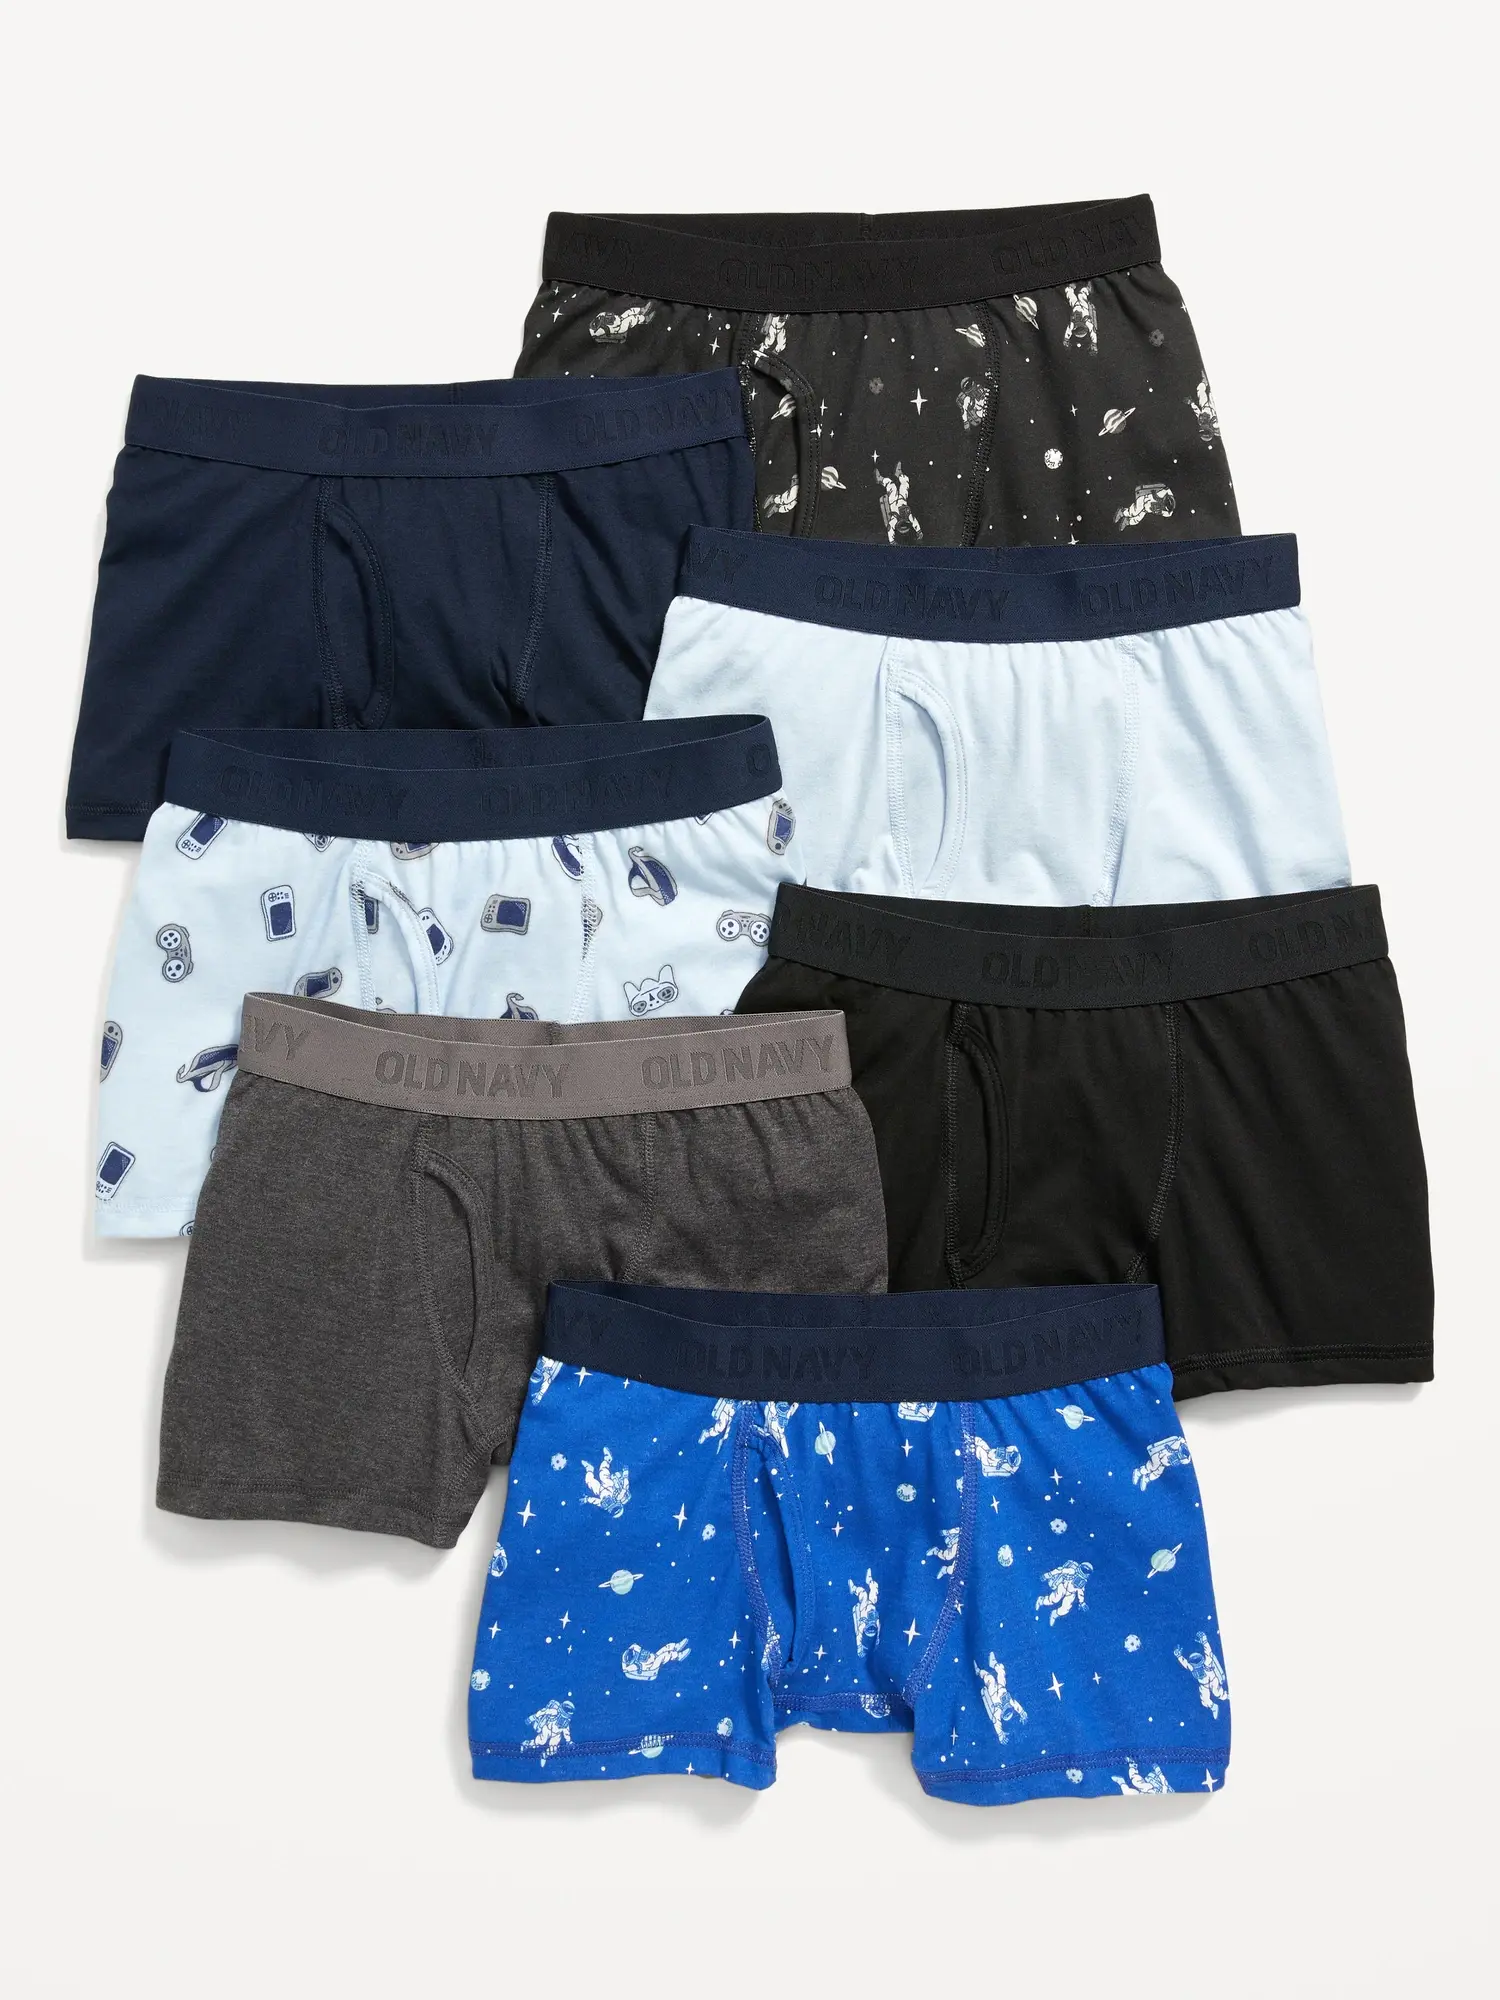 Old Navy - Printed Boxer-Briefs Underwear 7-Pack for Boys multi